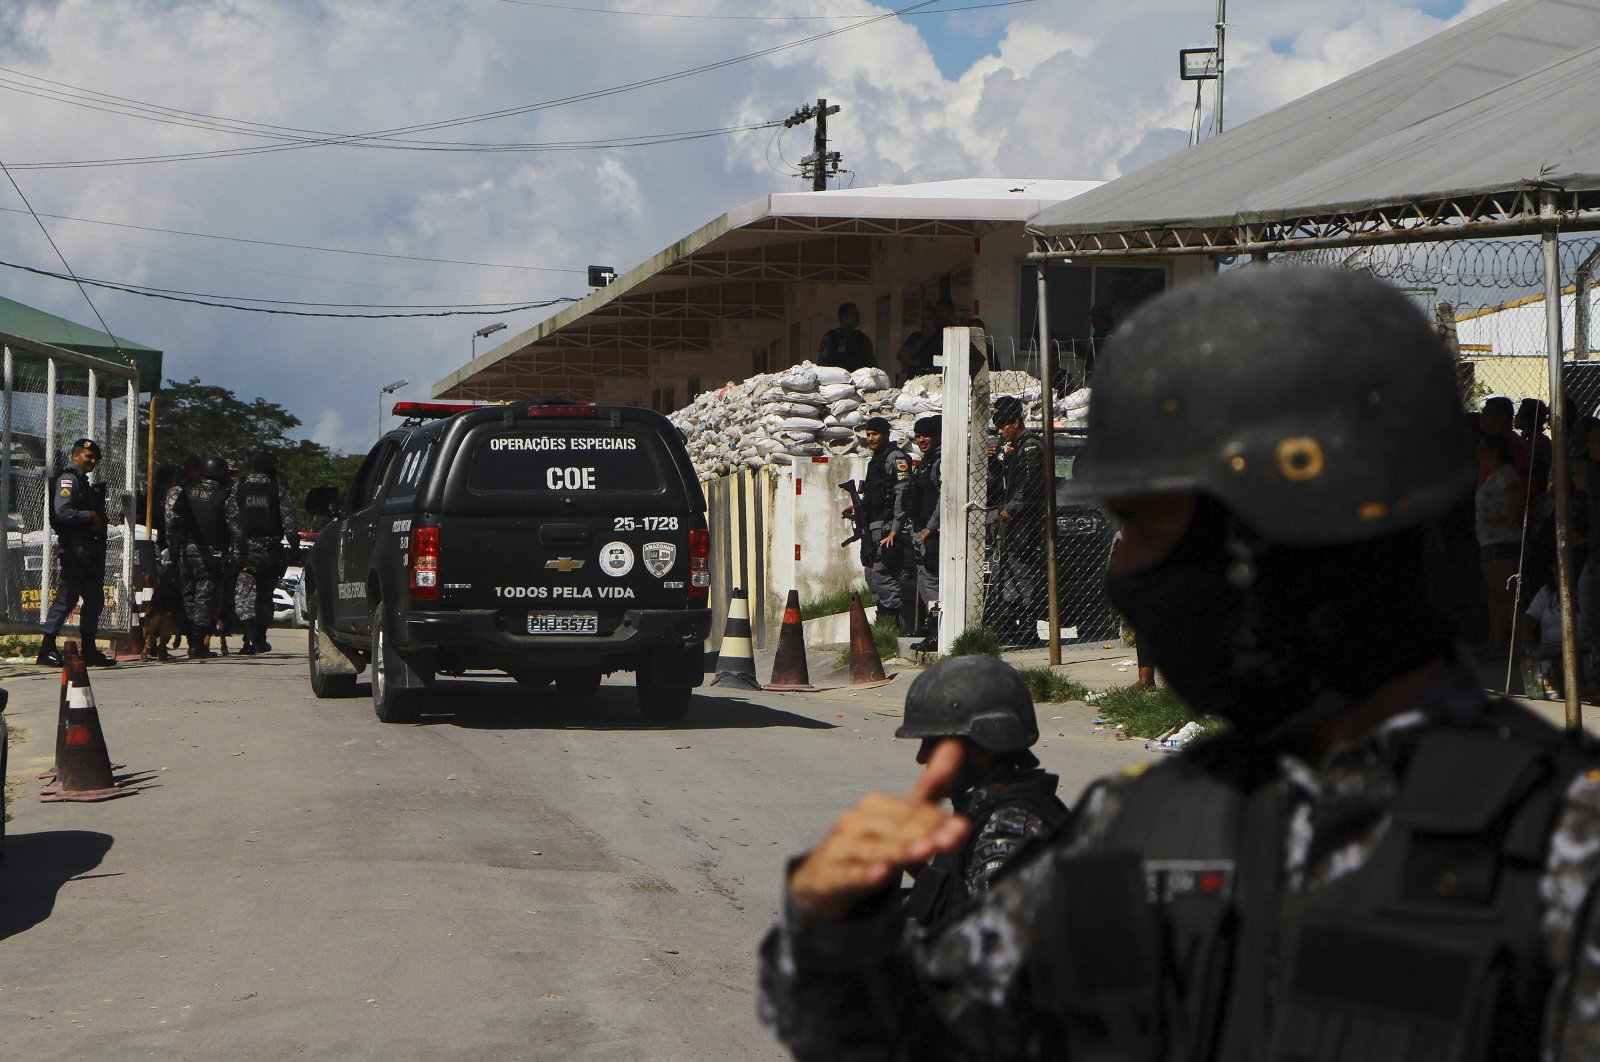 Police guard the entrance to the Anisio Jobim Prison Complex in Manaus in the northern state of Amazonas, Brazil, Sunday, May 26, 2019. (AP Photo)